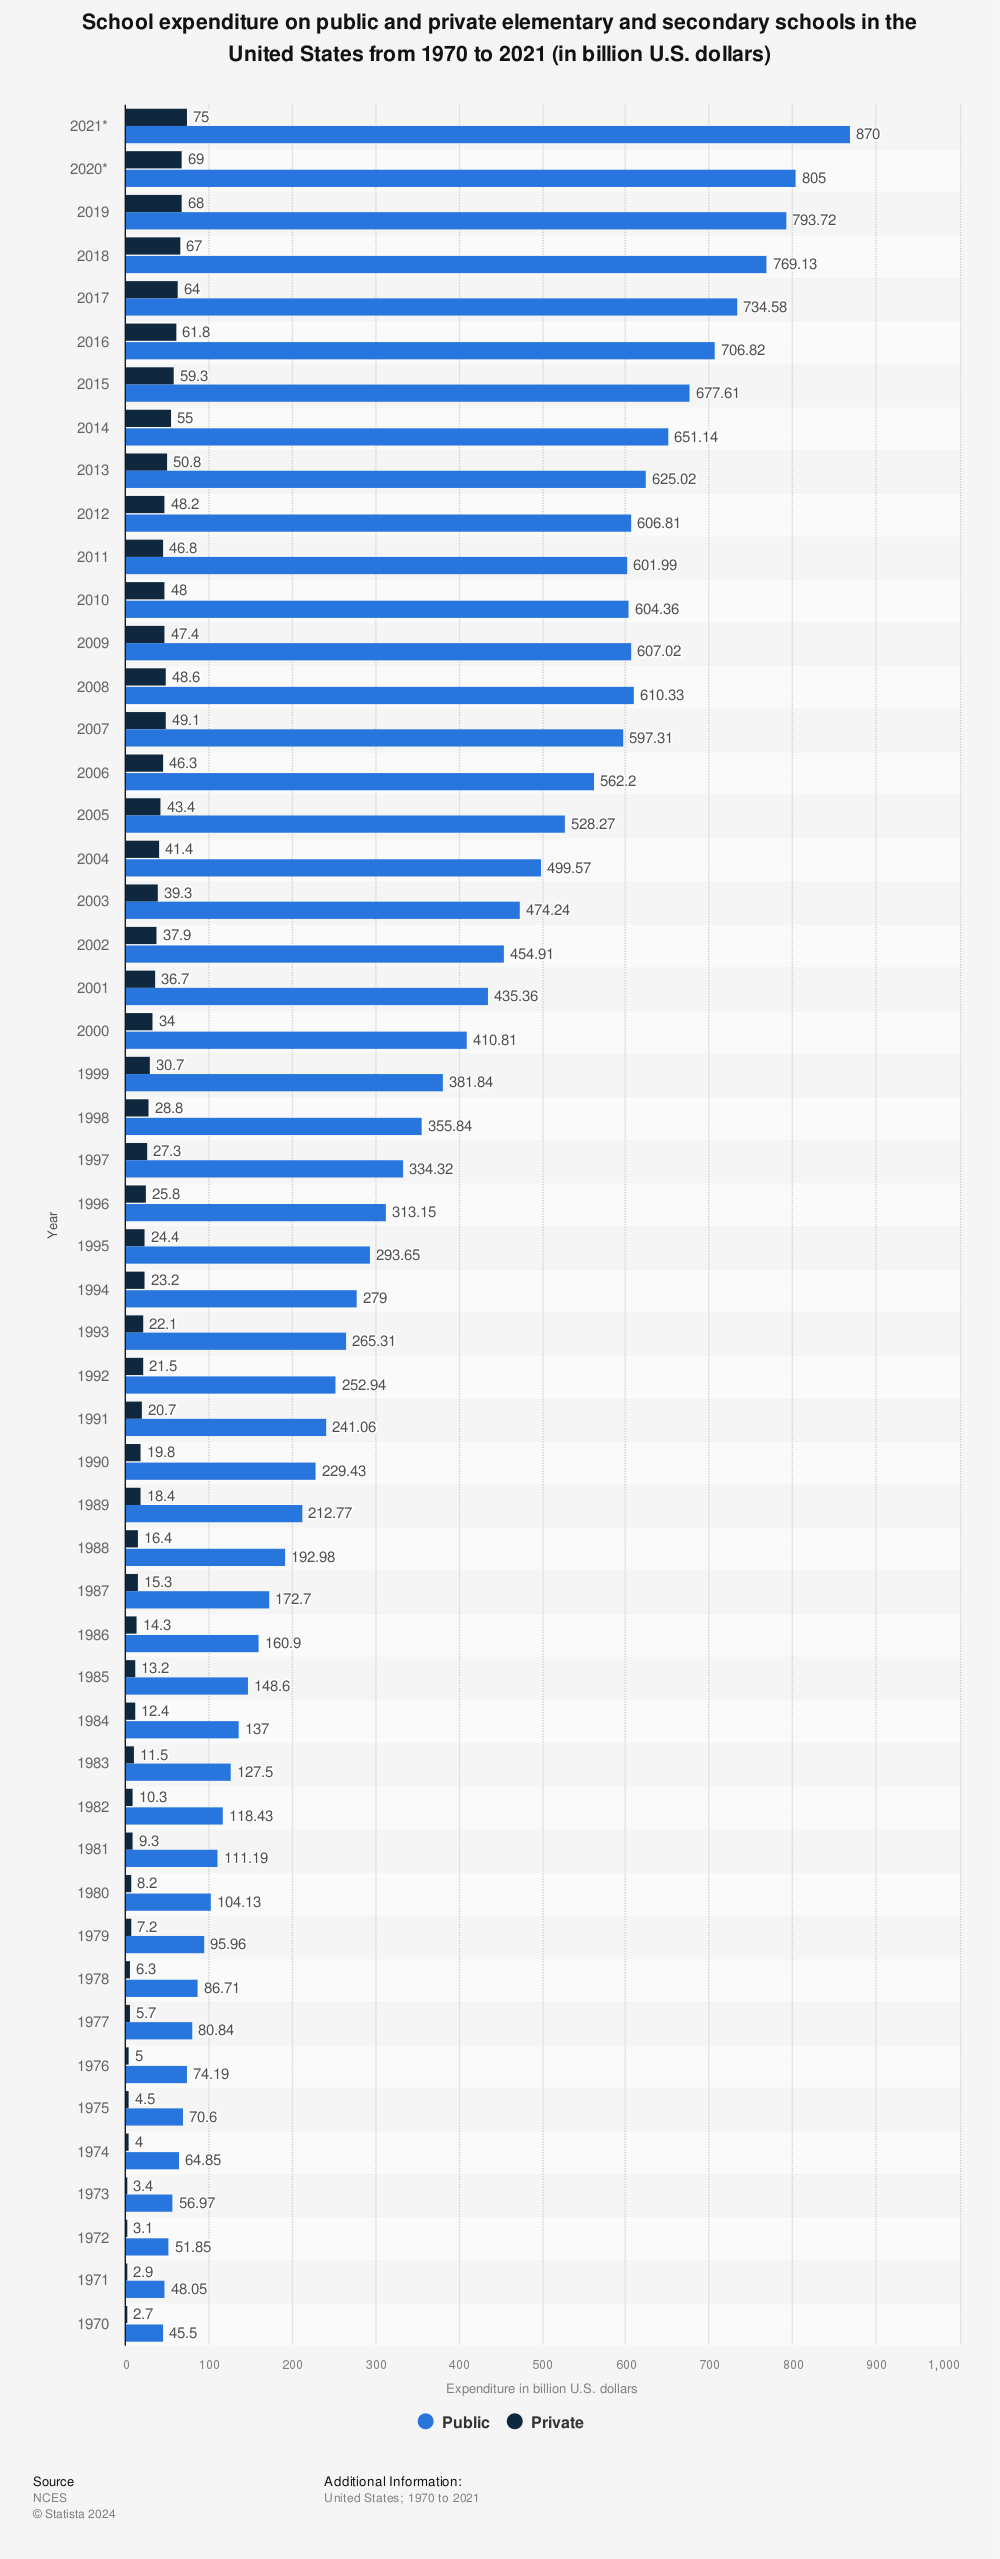 Statistic: School expenditure on public and private elementary and secondary schools in the United States from 1970 to 2020 (in billion U.S. dollars) | Statista